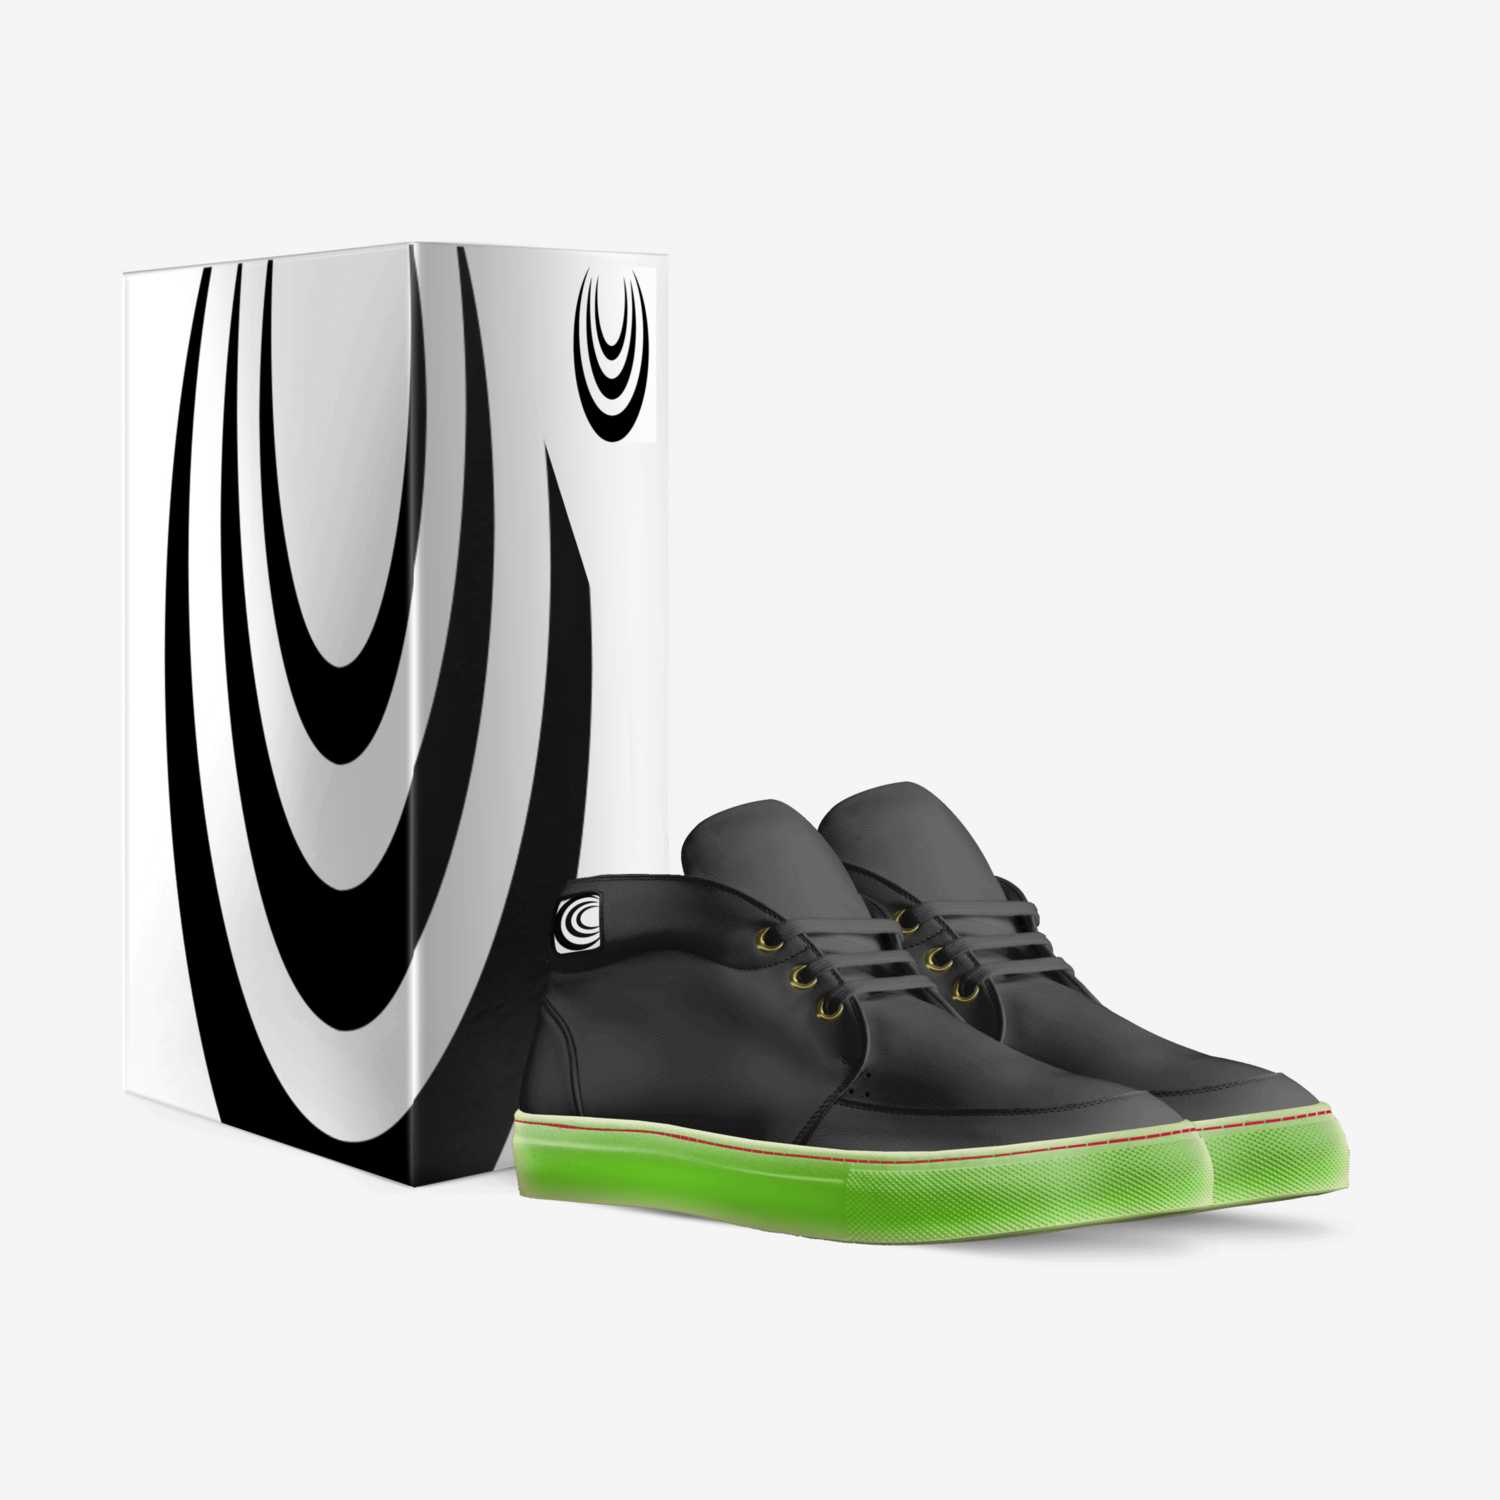 CHRONIC OZ custom made in Italy shoes by Chronic Athletics | Box view